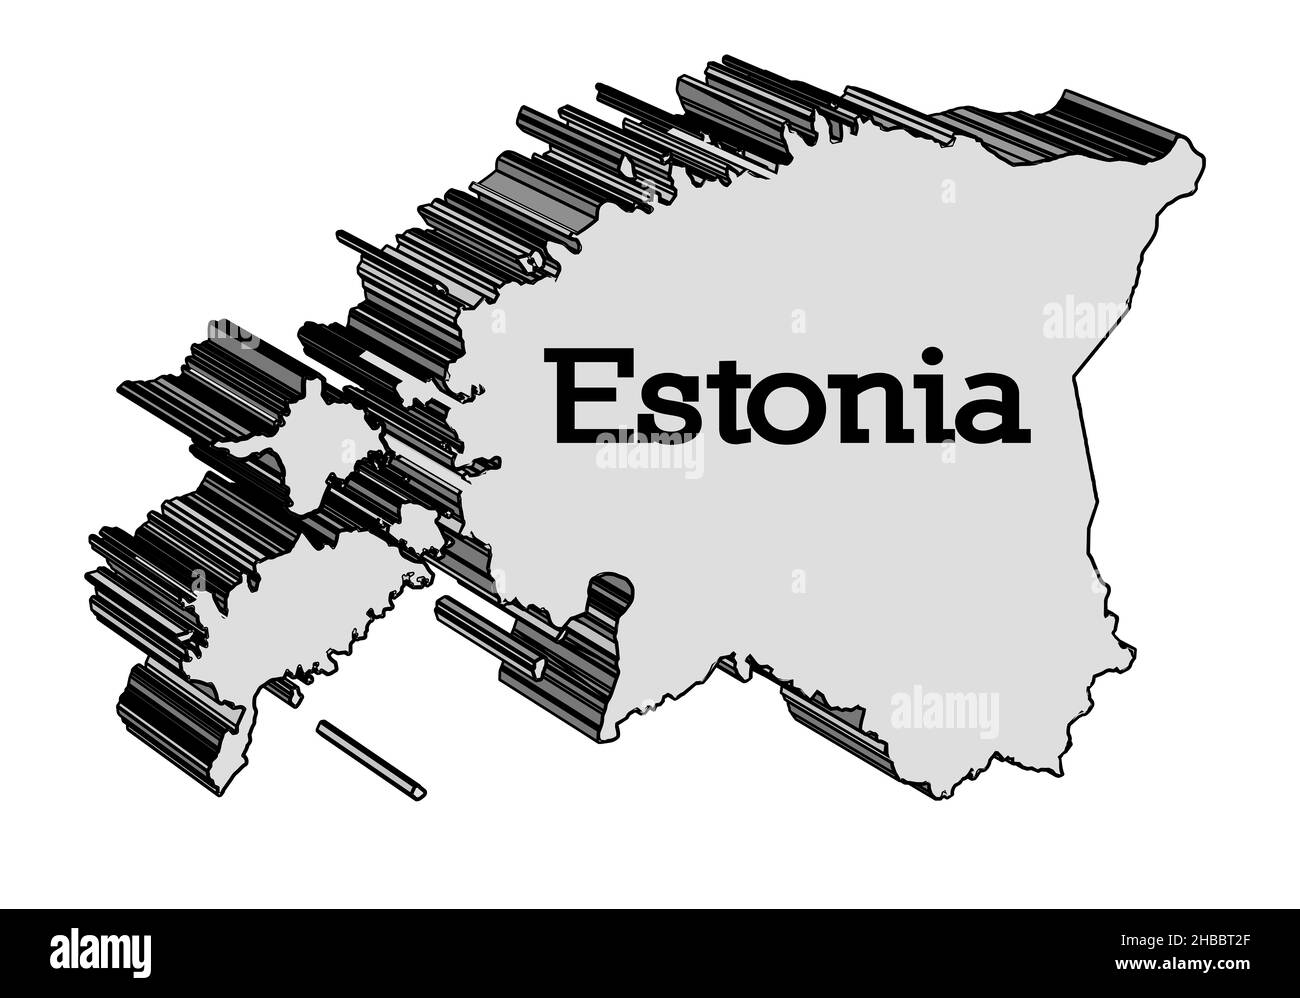 Outline 3D map of Estonia over a white background Stock Photo